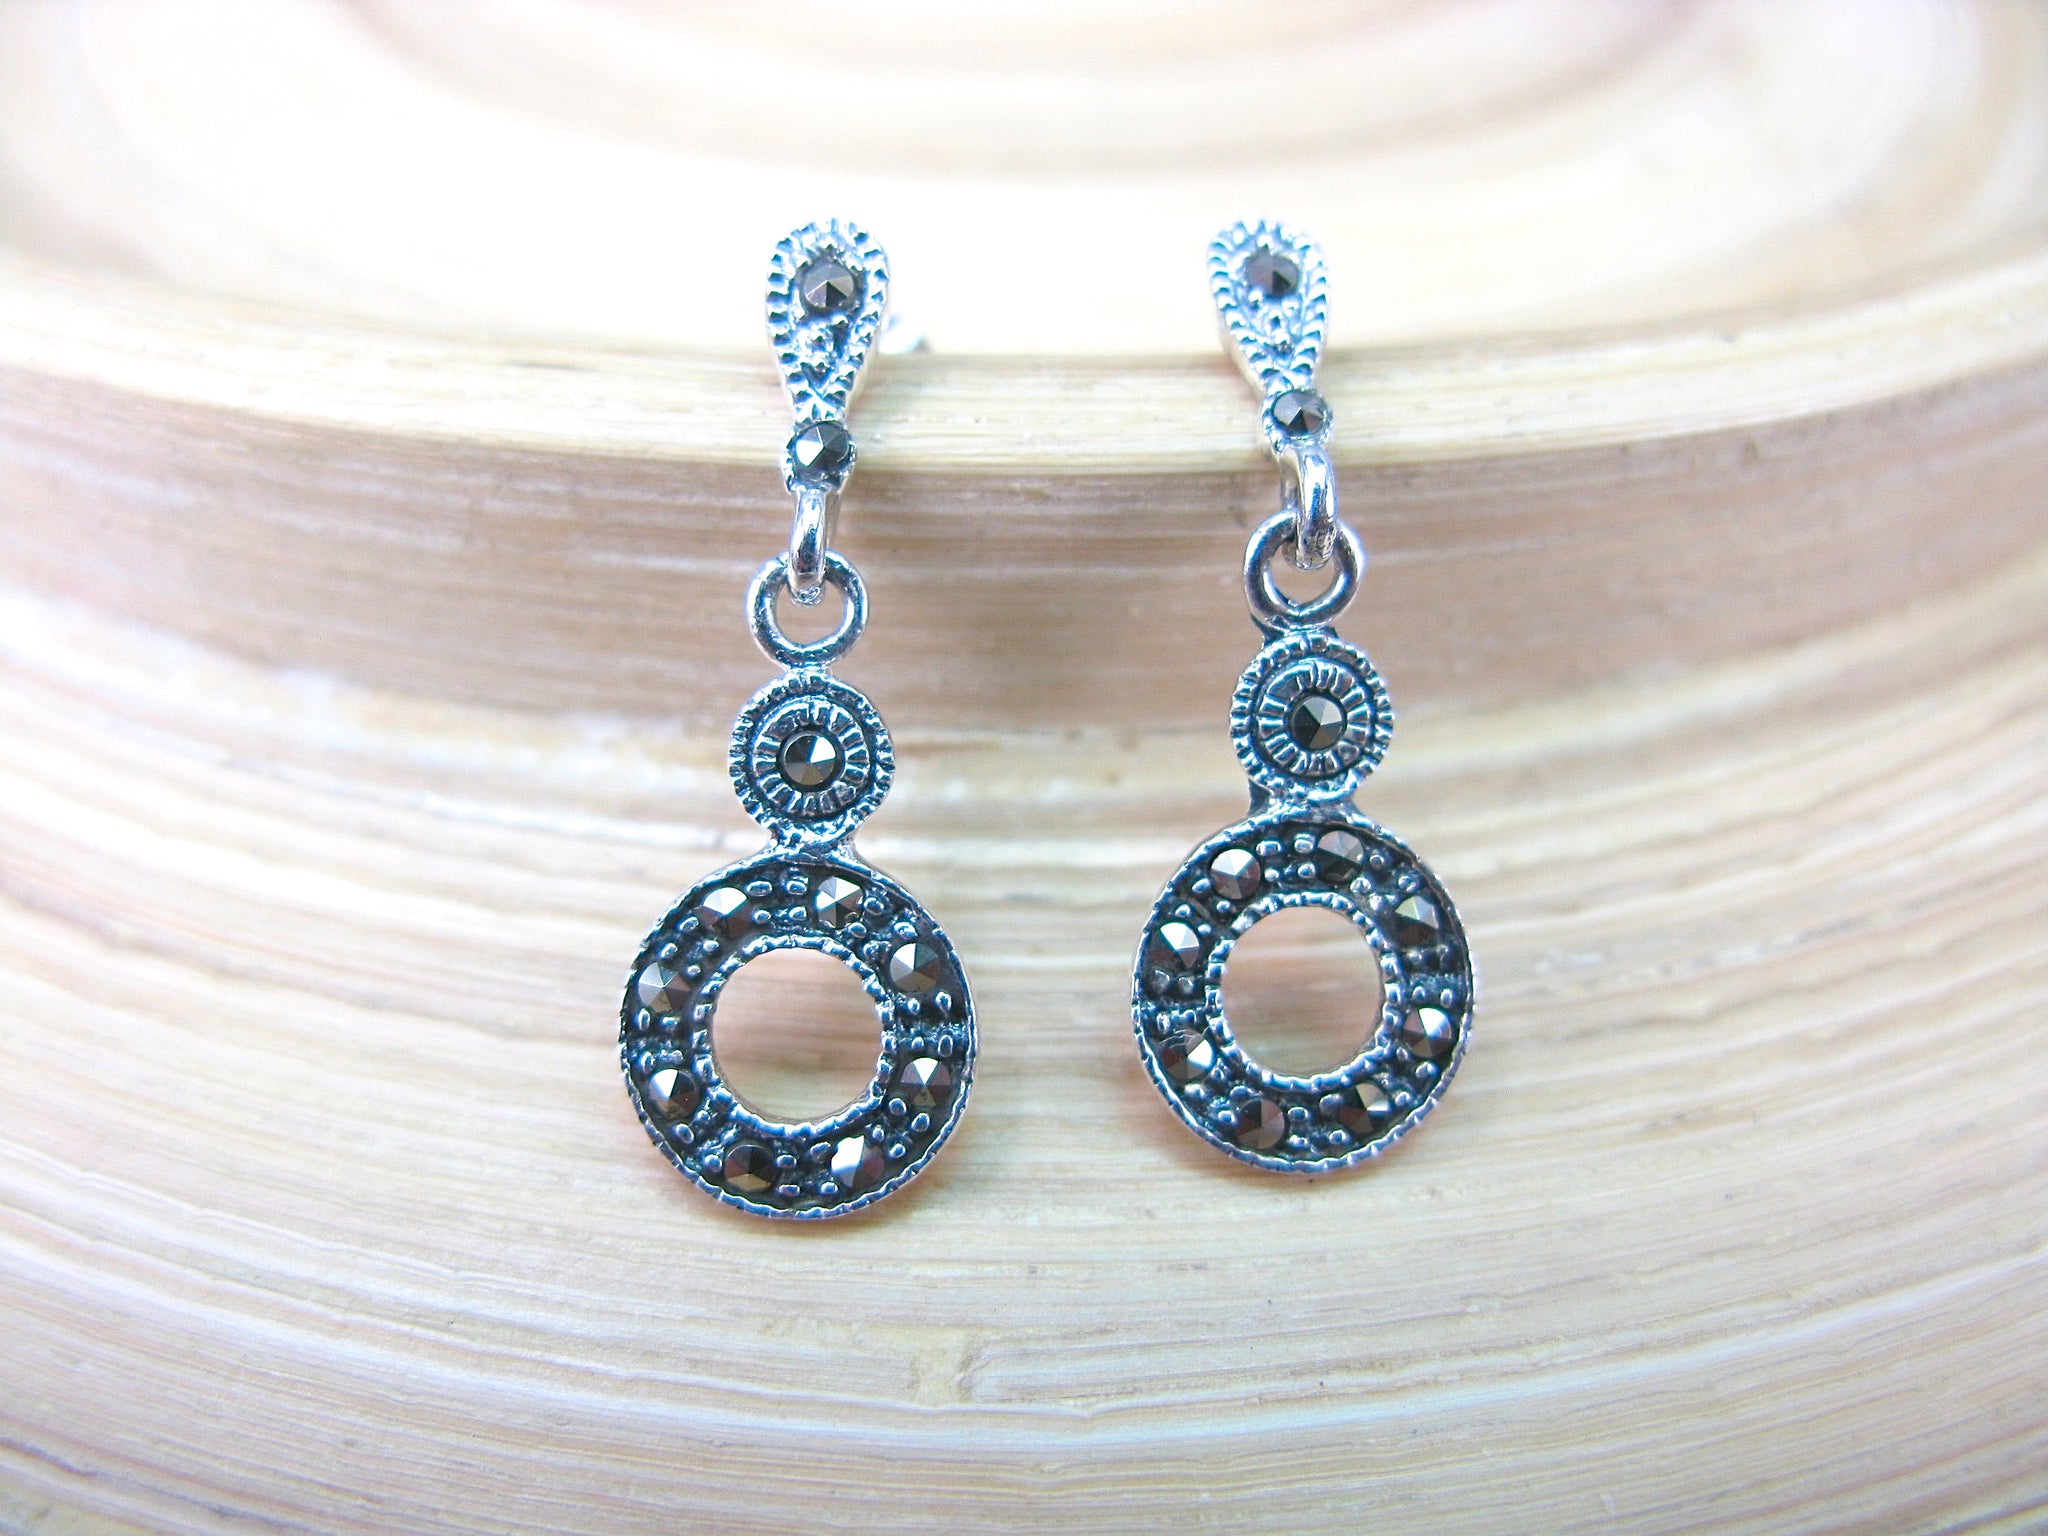 Round Circle Marcasite Earrings in 925 Sterling Silver